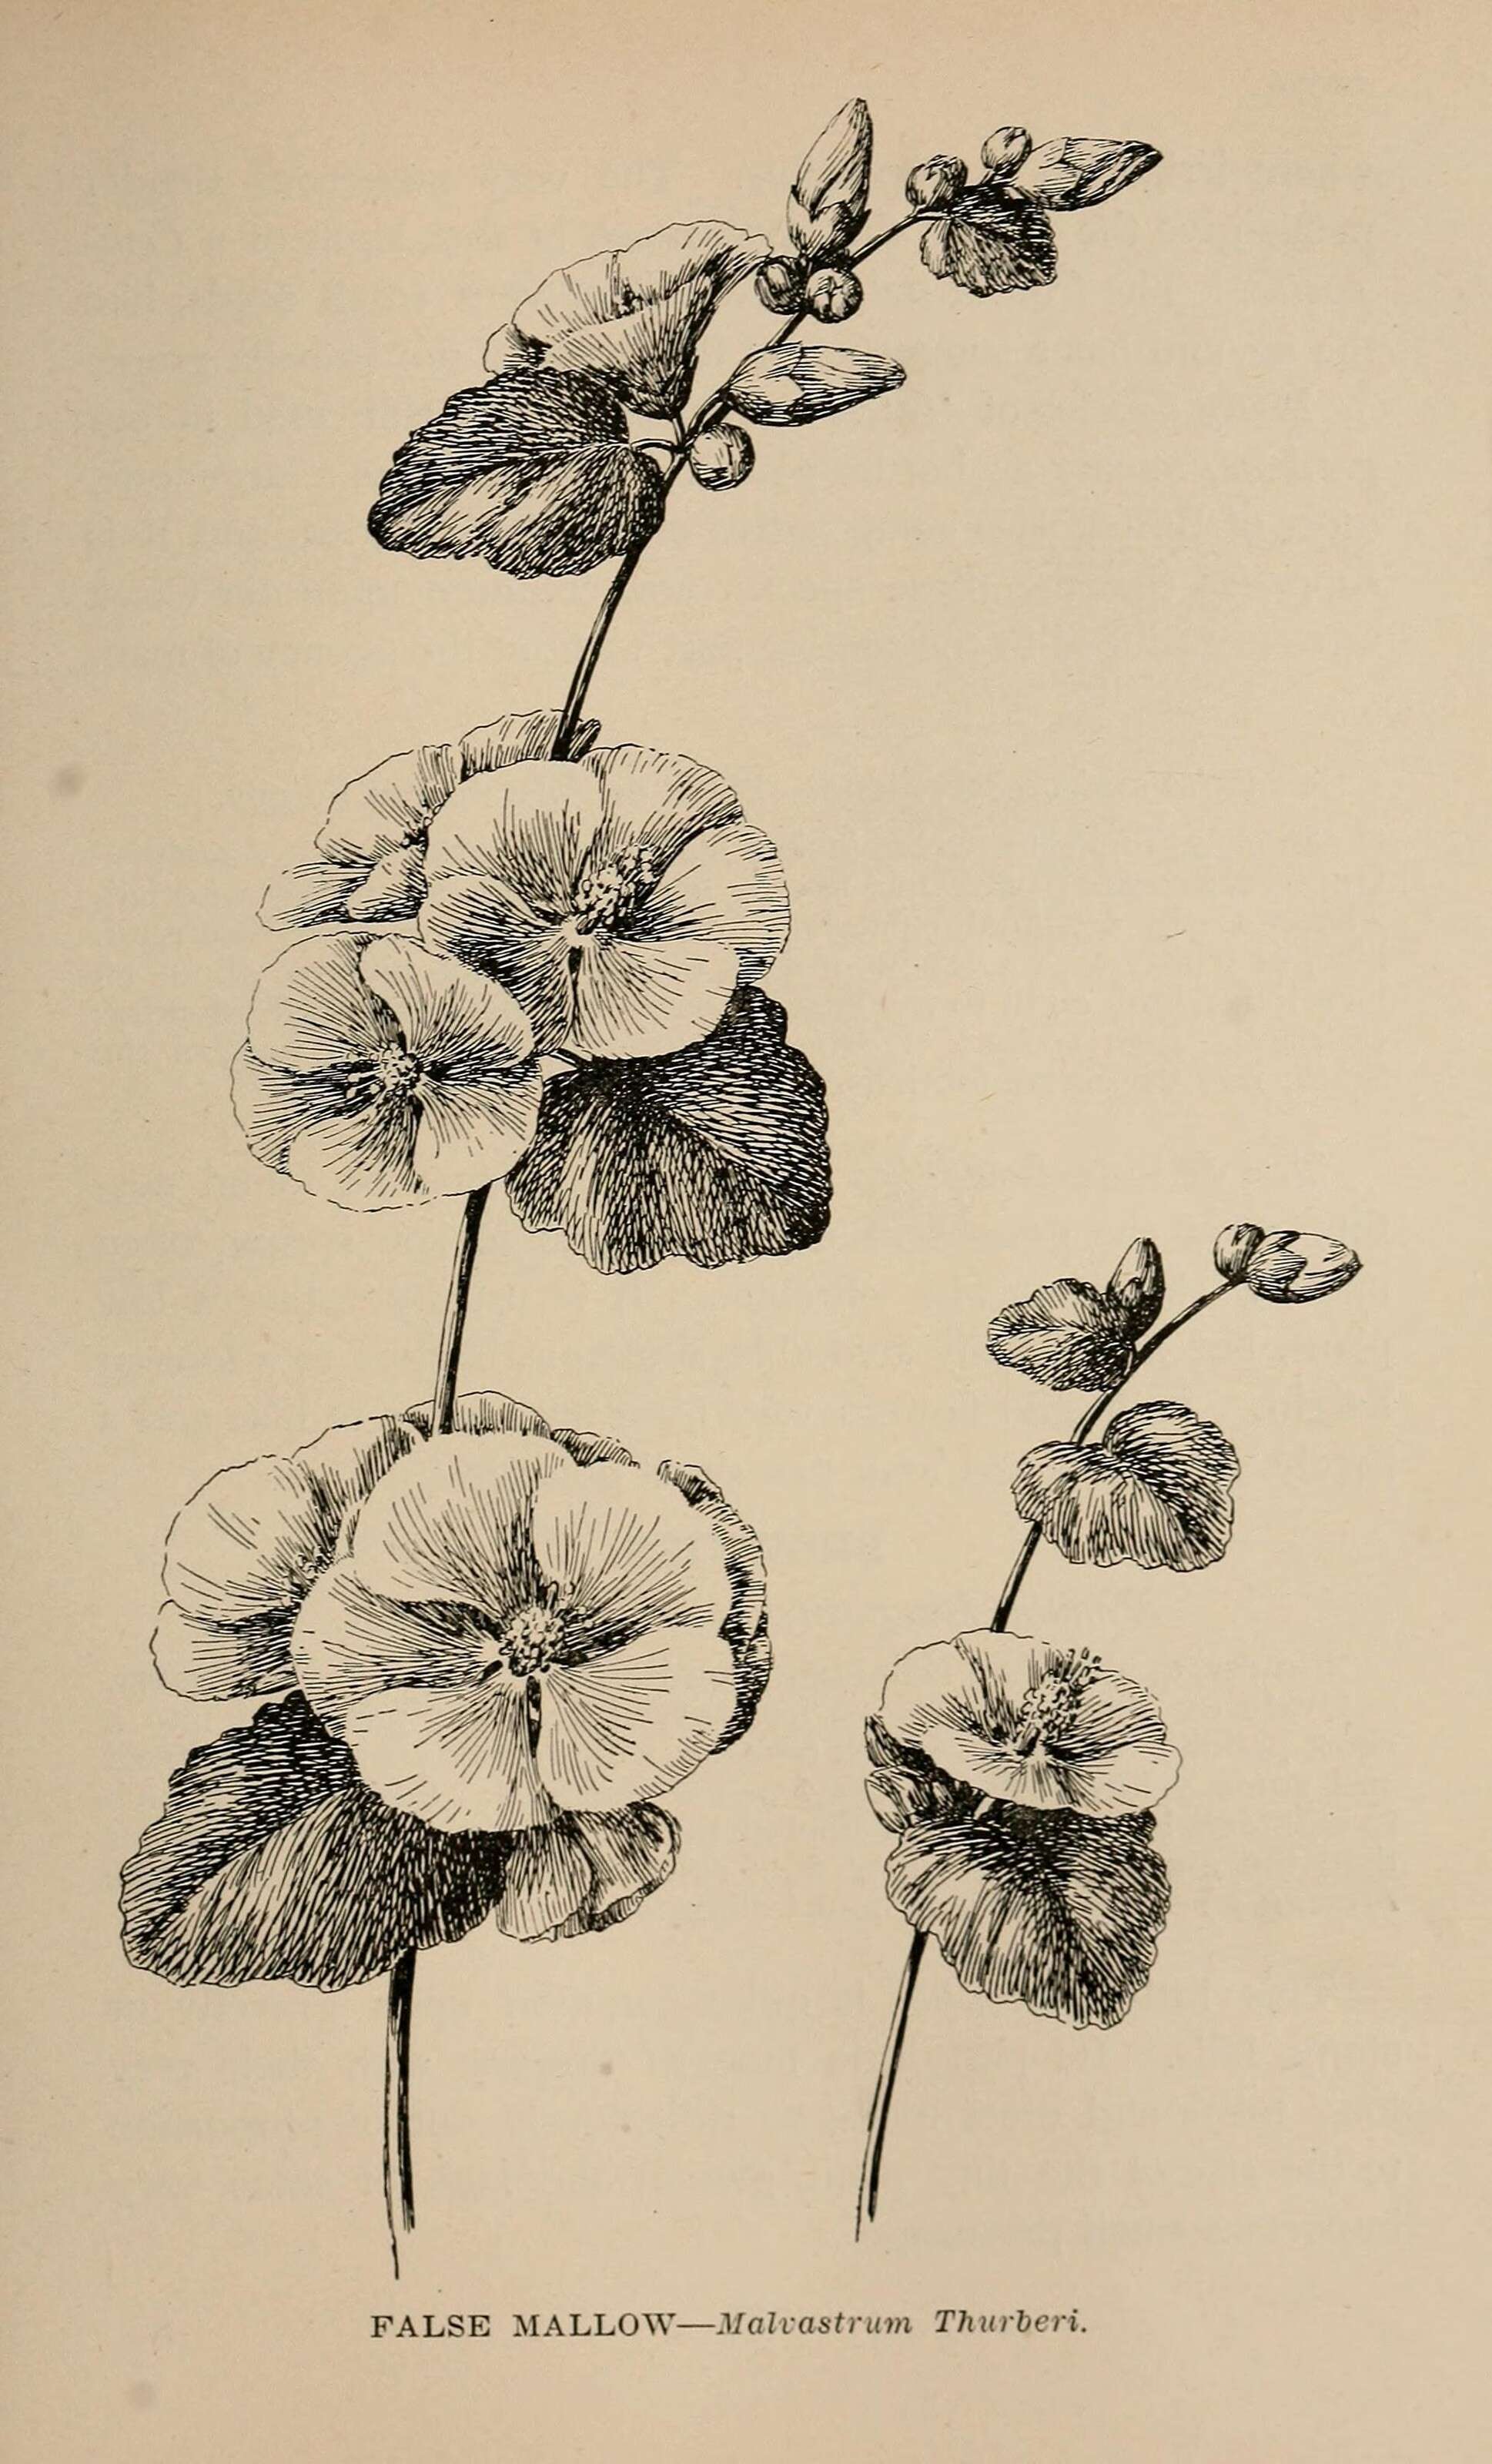 Image of Chaparral bushmallow